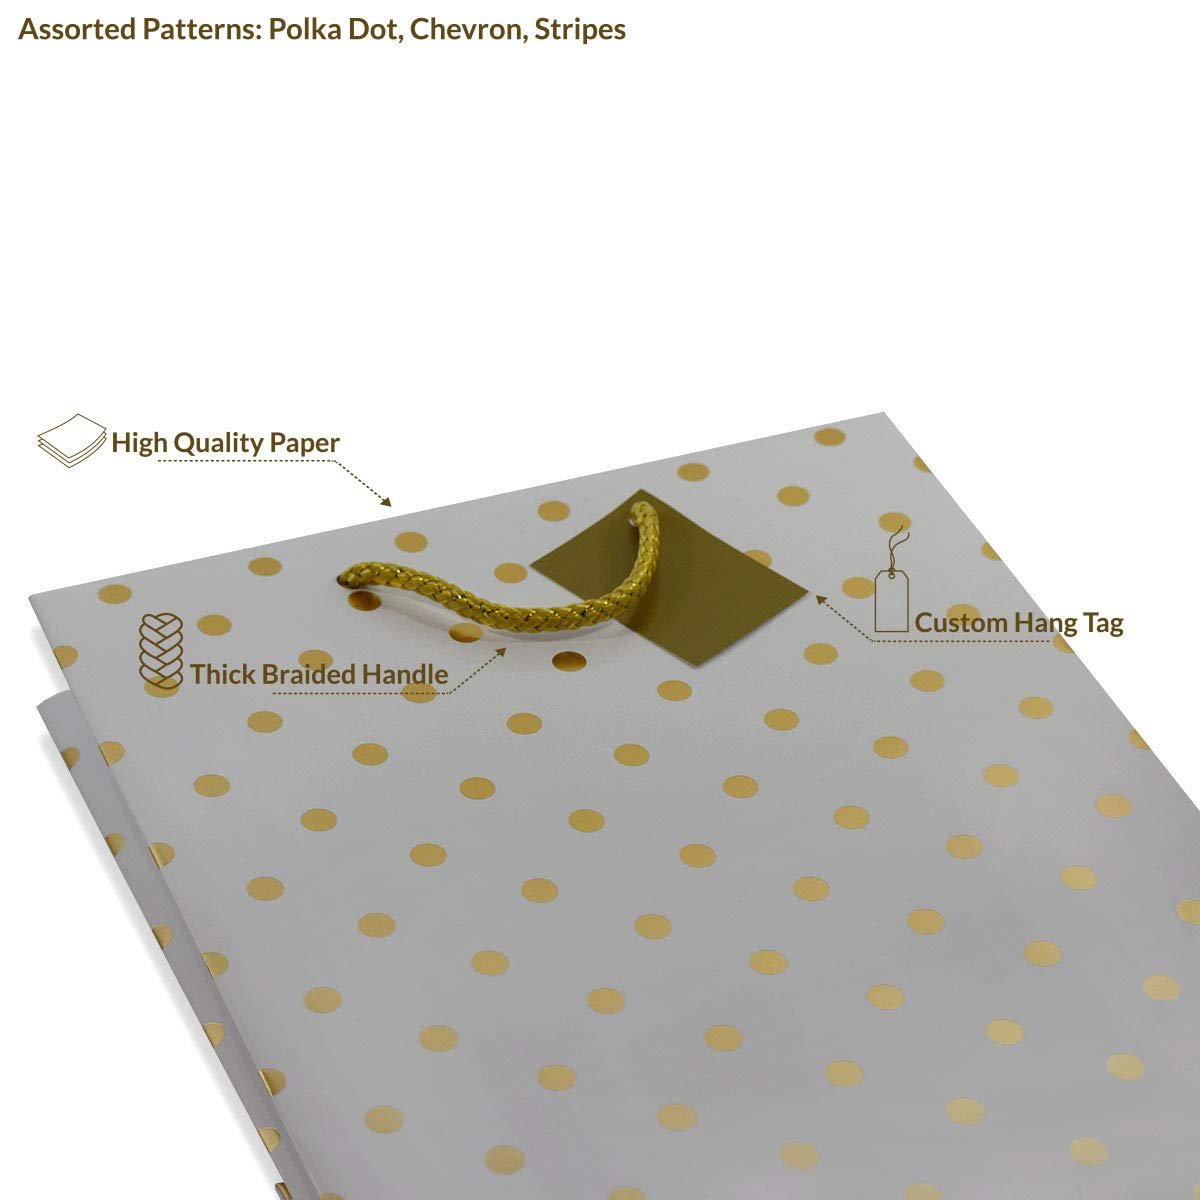 Gold Gift Bags - 12 Pack Large Metallic Designer Paper Bags with Handles, Fancy Gift Wrap Eurto Totes with Polka Dot, Chevron, Stripe Pattern for Birthdays, Party Favors, Holidays, Christmas, Bulk - 10x5x13